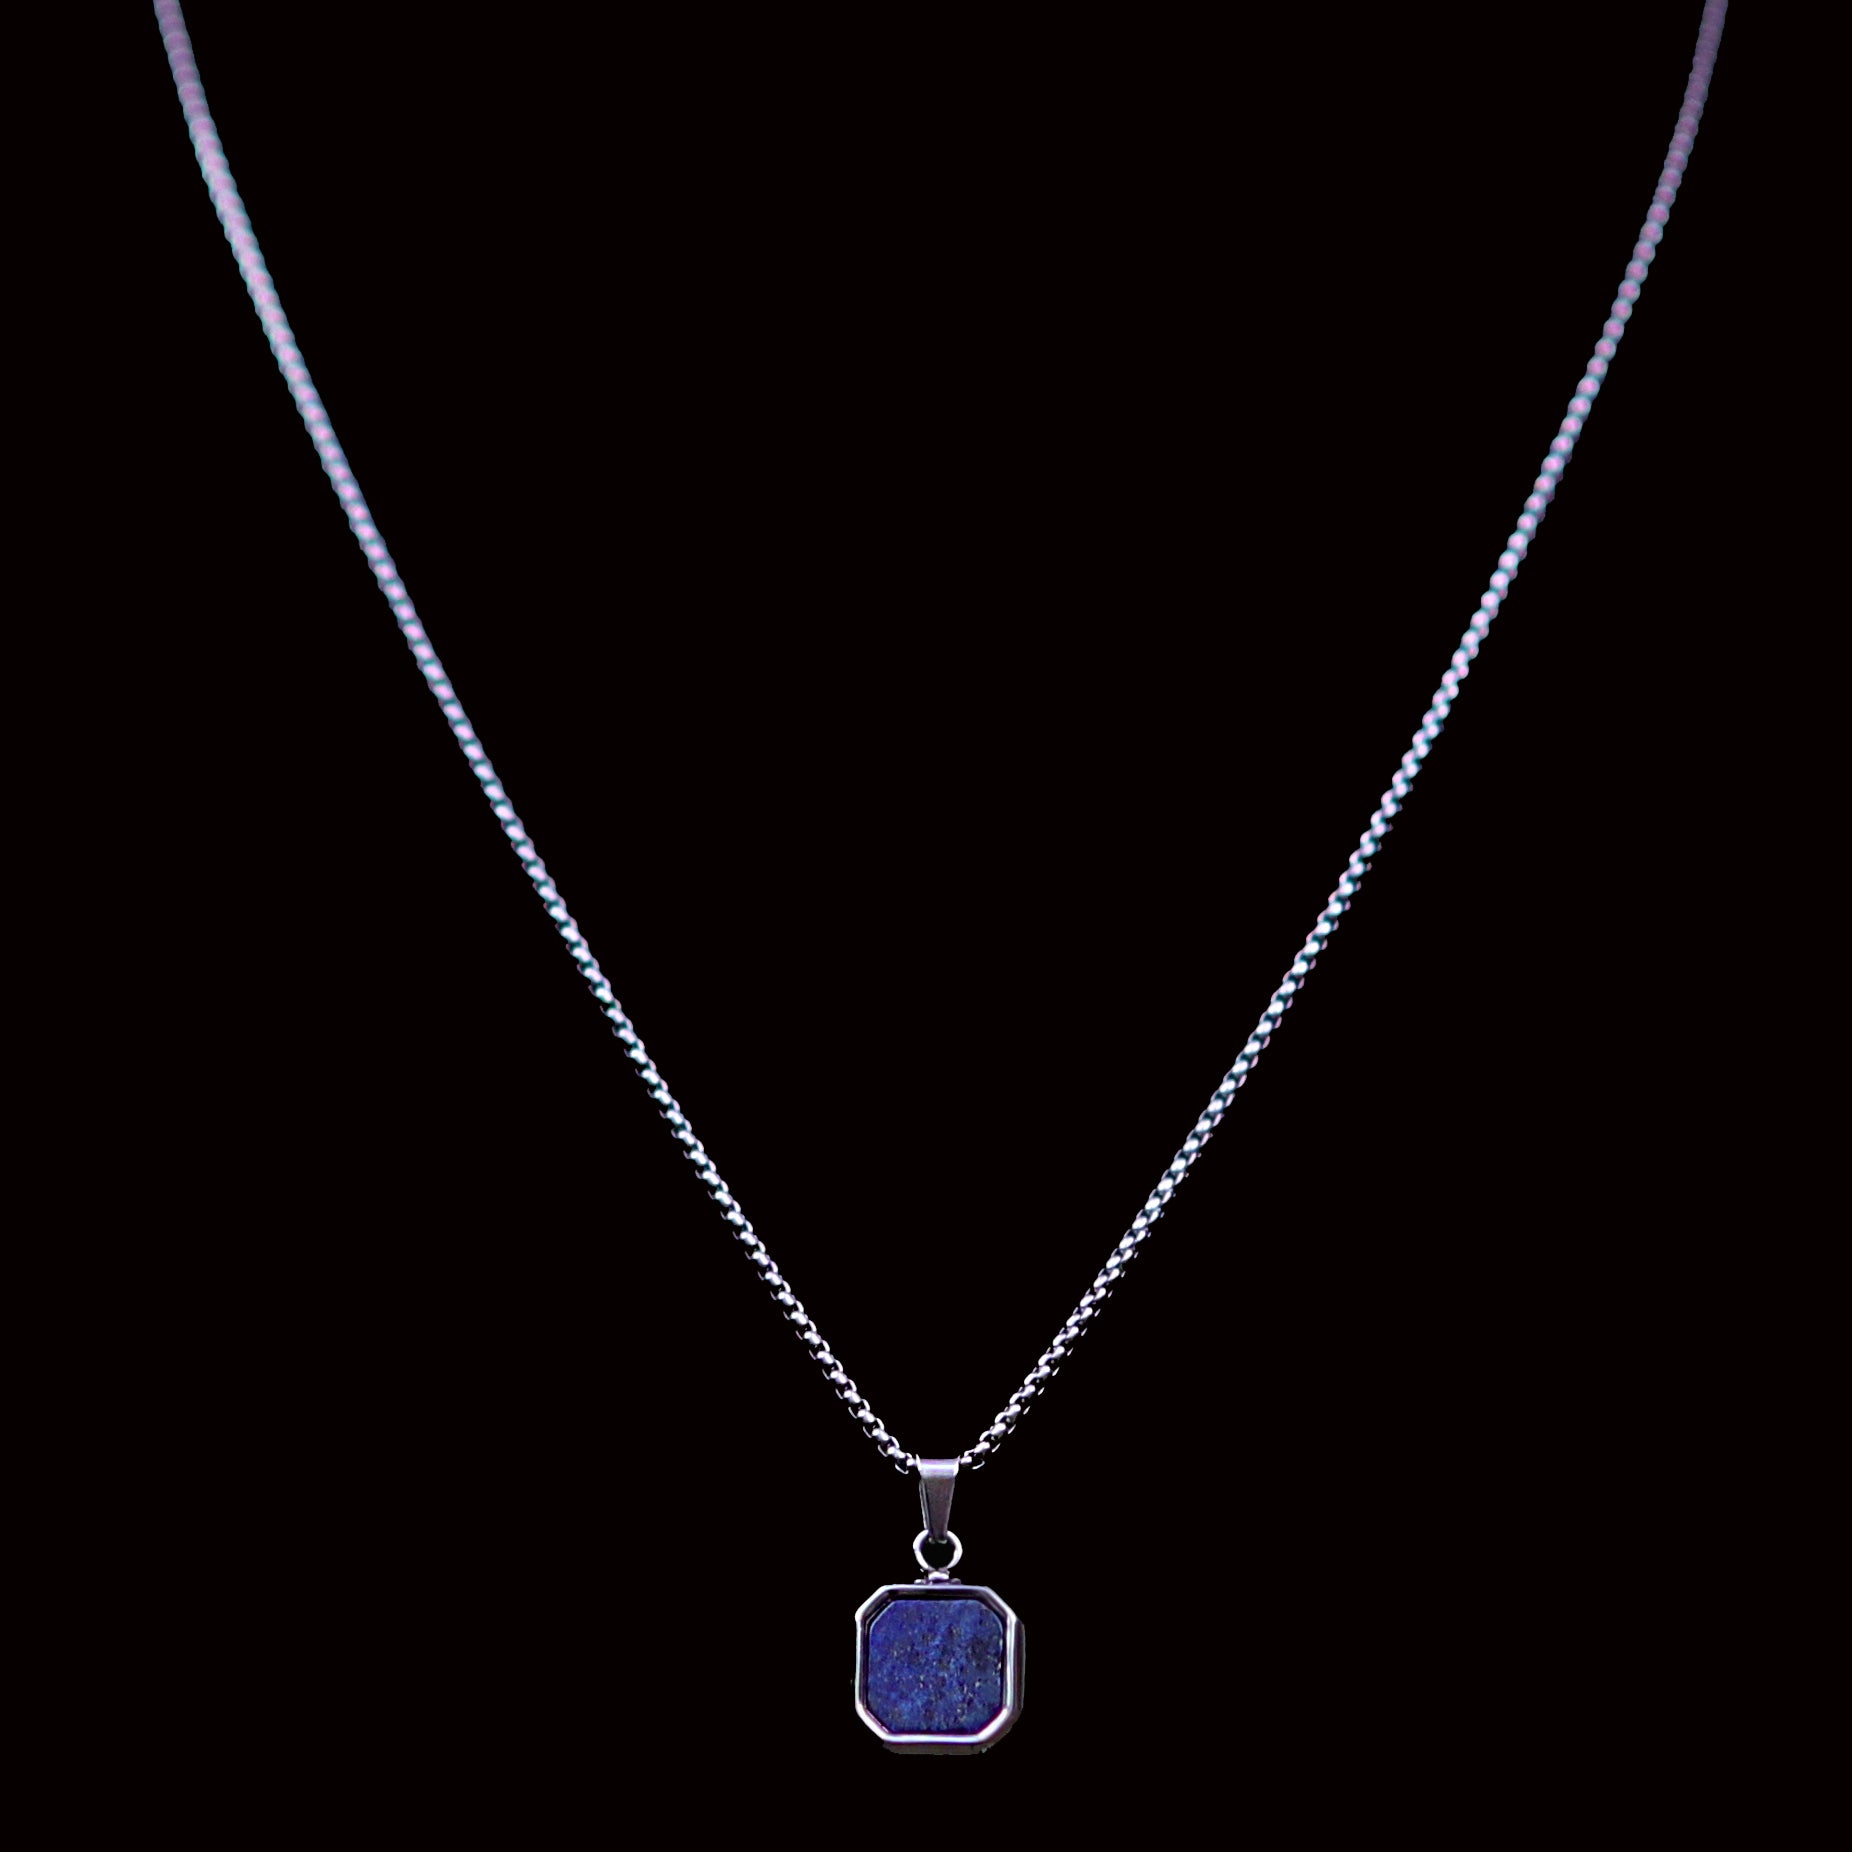 Bryok Stainless Steel Box Chain Necklace with Square Stone Pendant